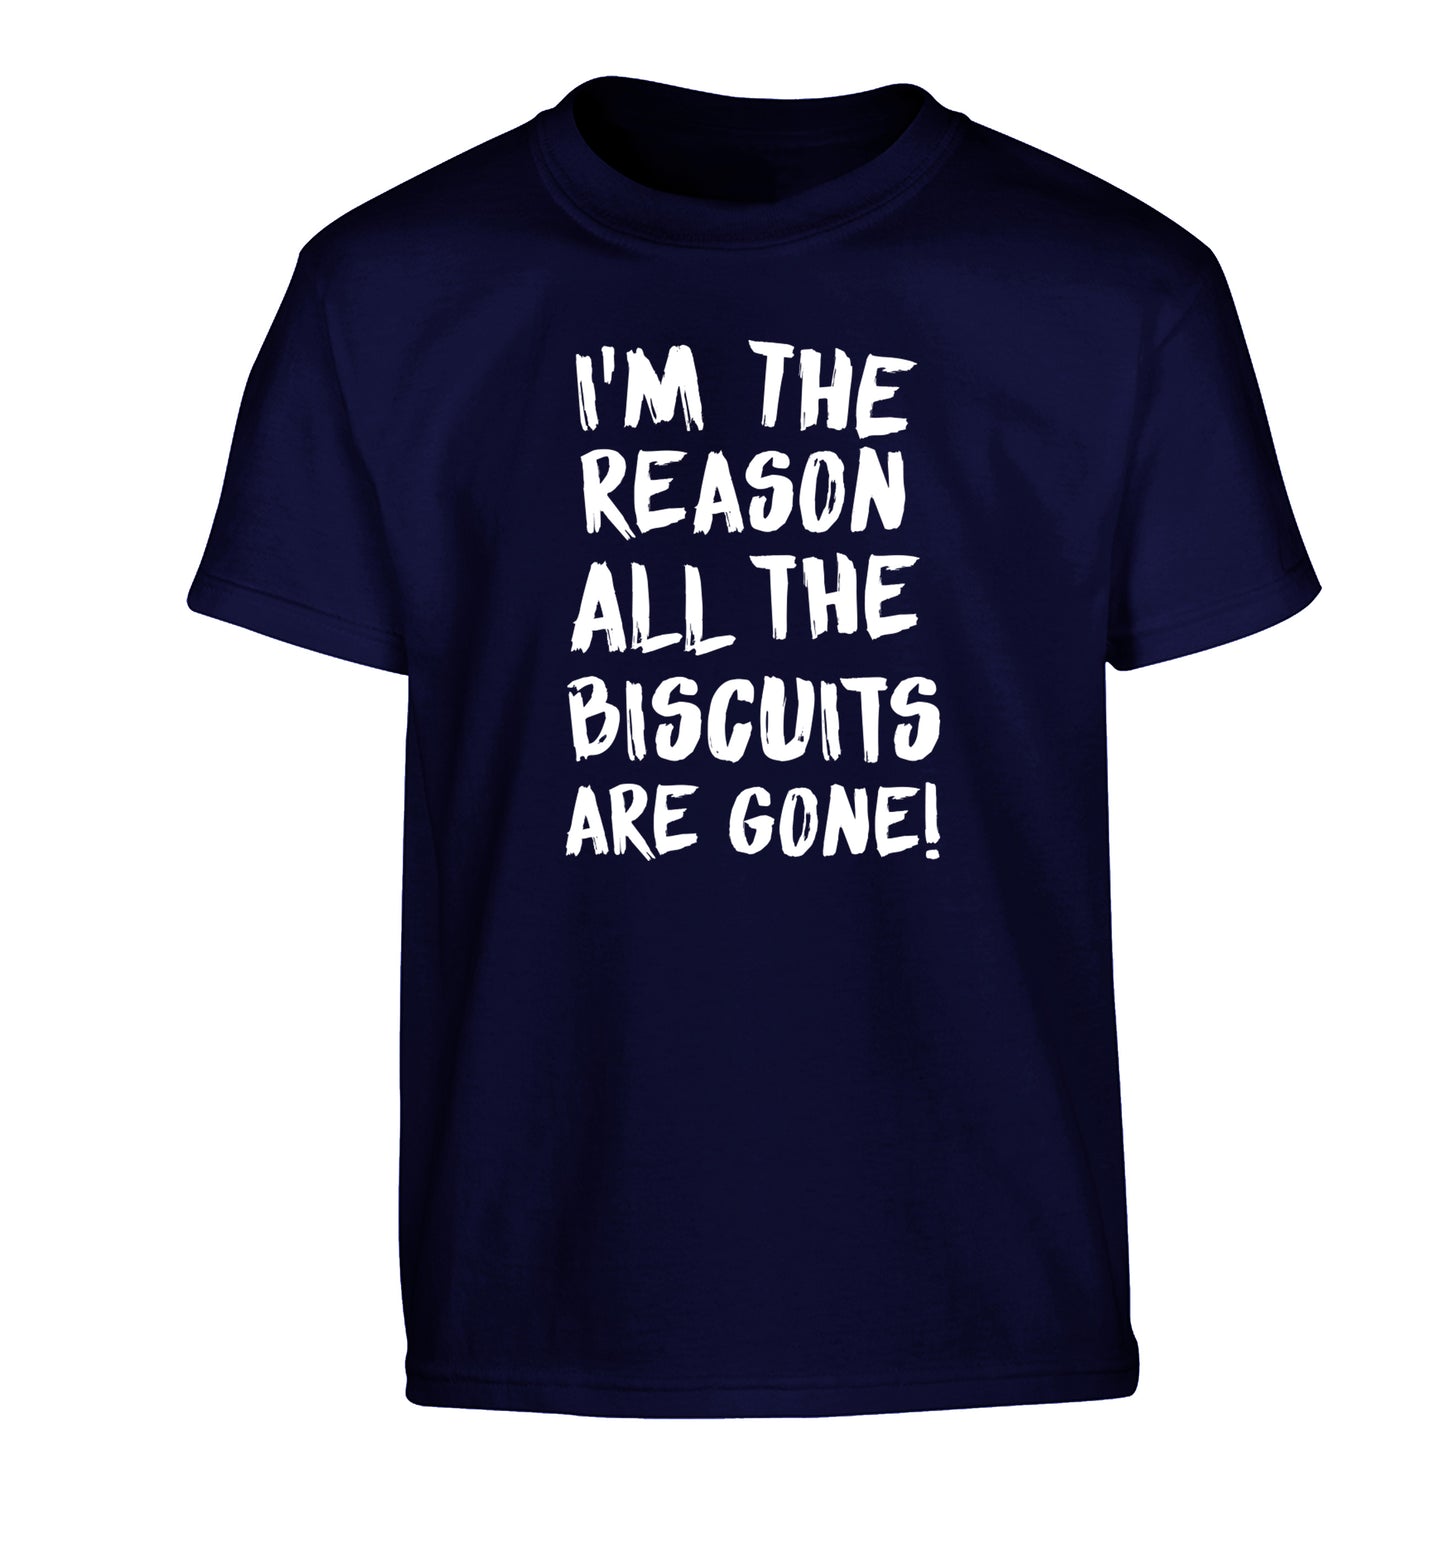 I'm the reason why all the biscuits are gone Children's navy Tshirt 12-13 Years